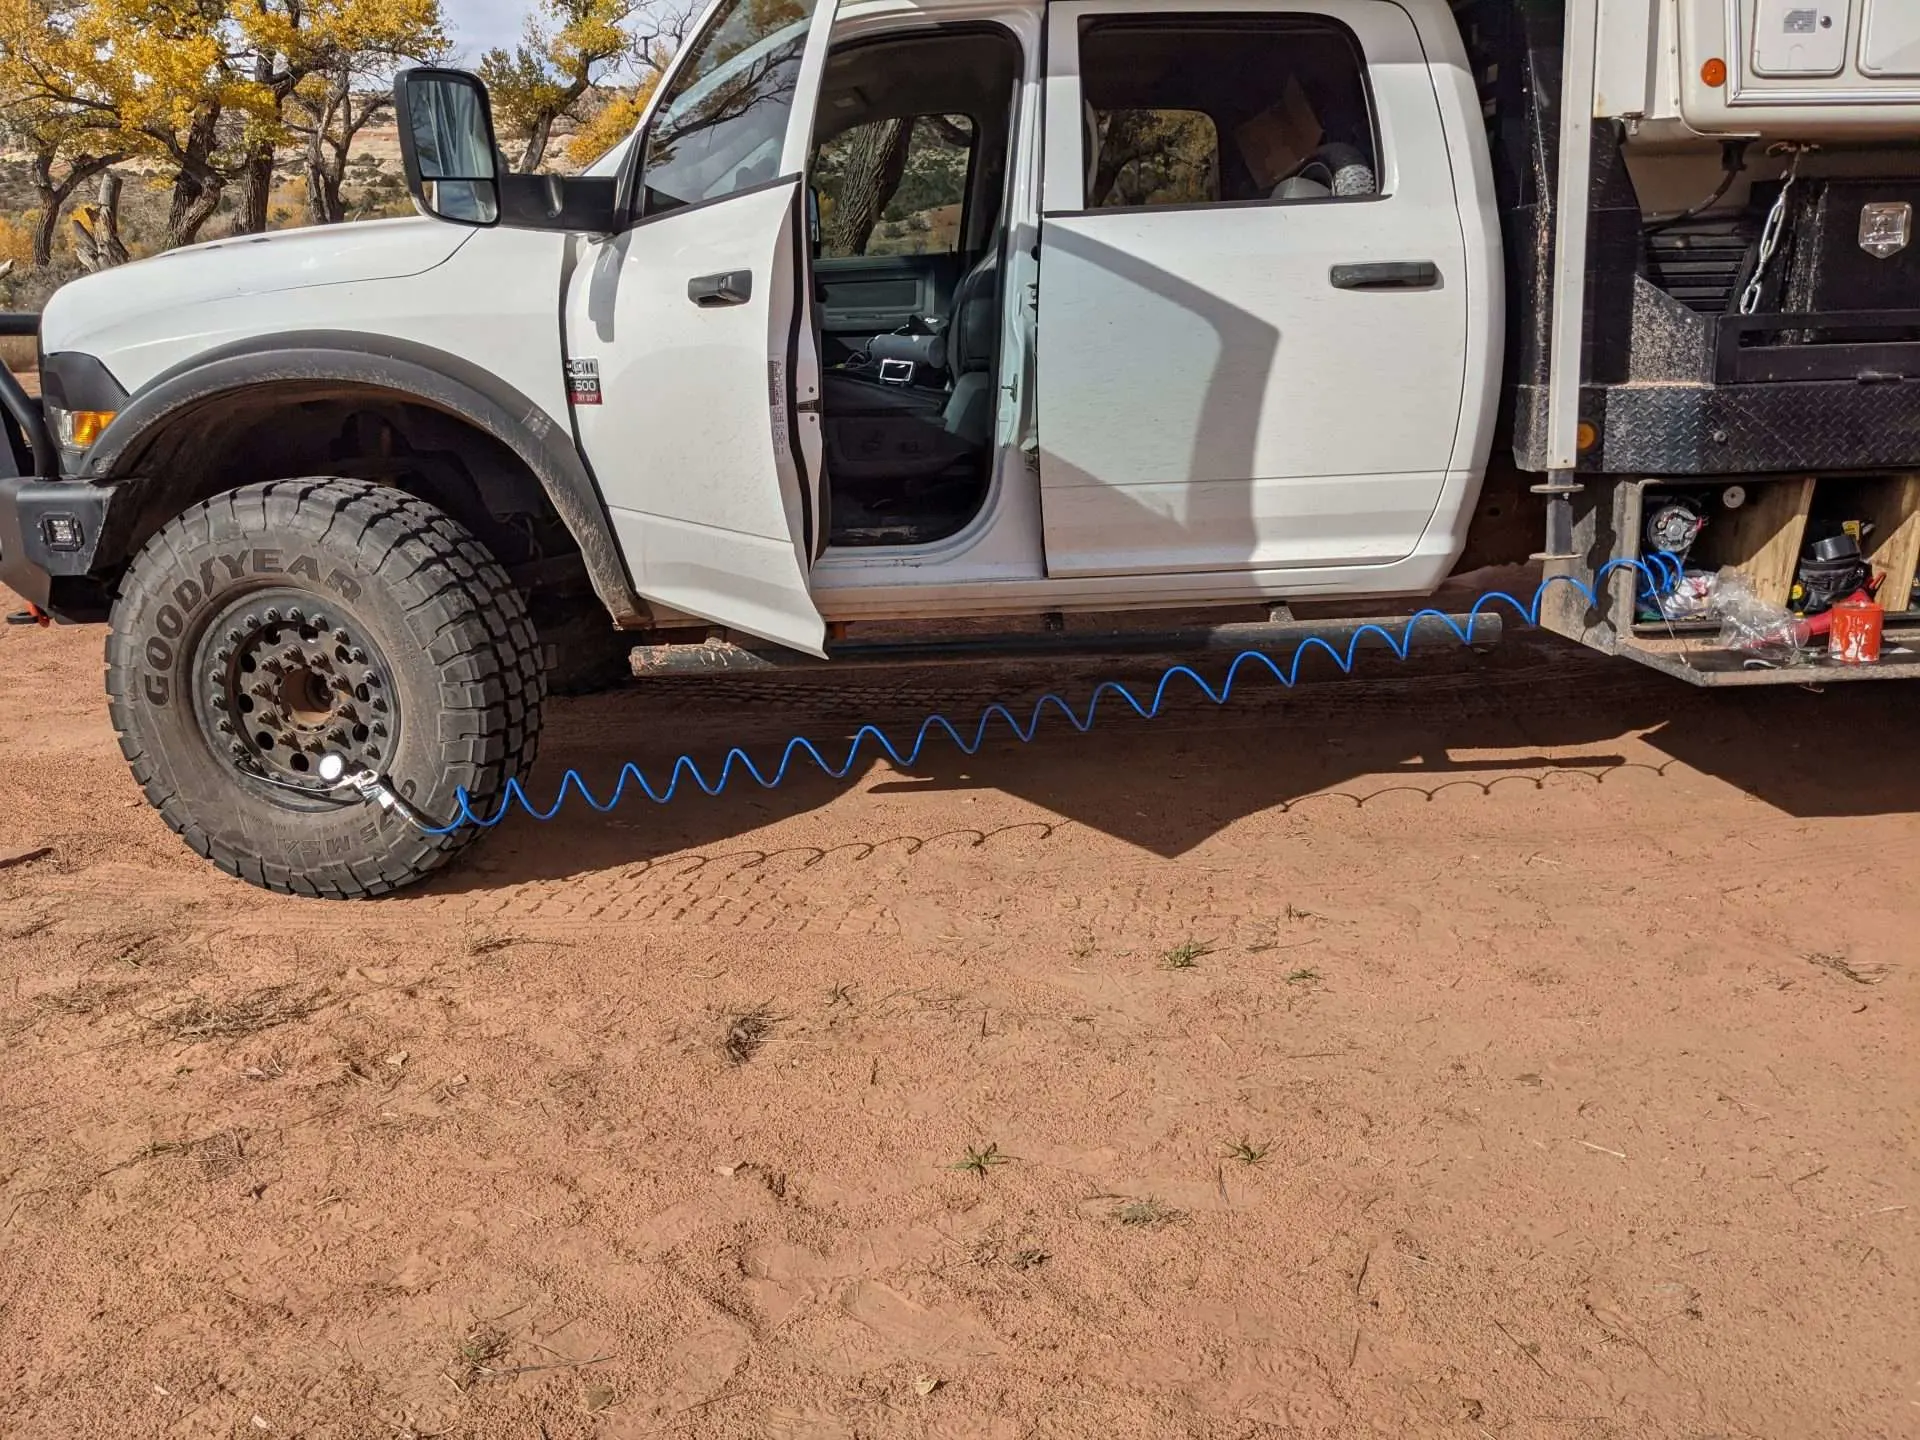 Tire deflator tool attached to tire while overlanding